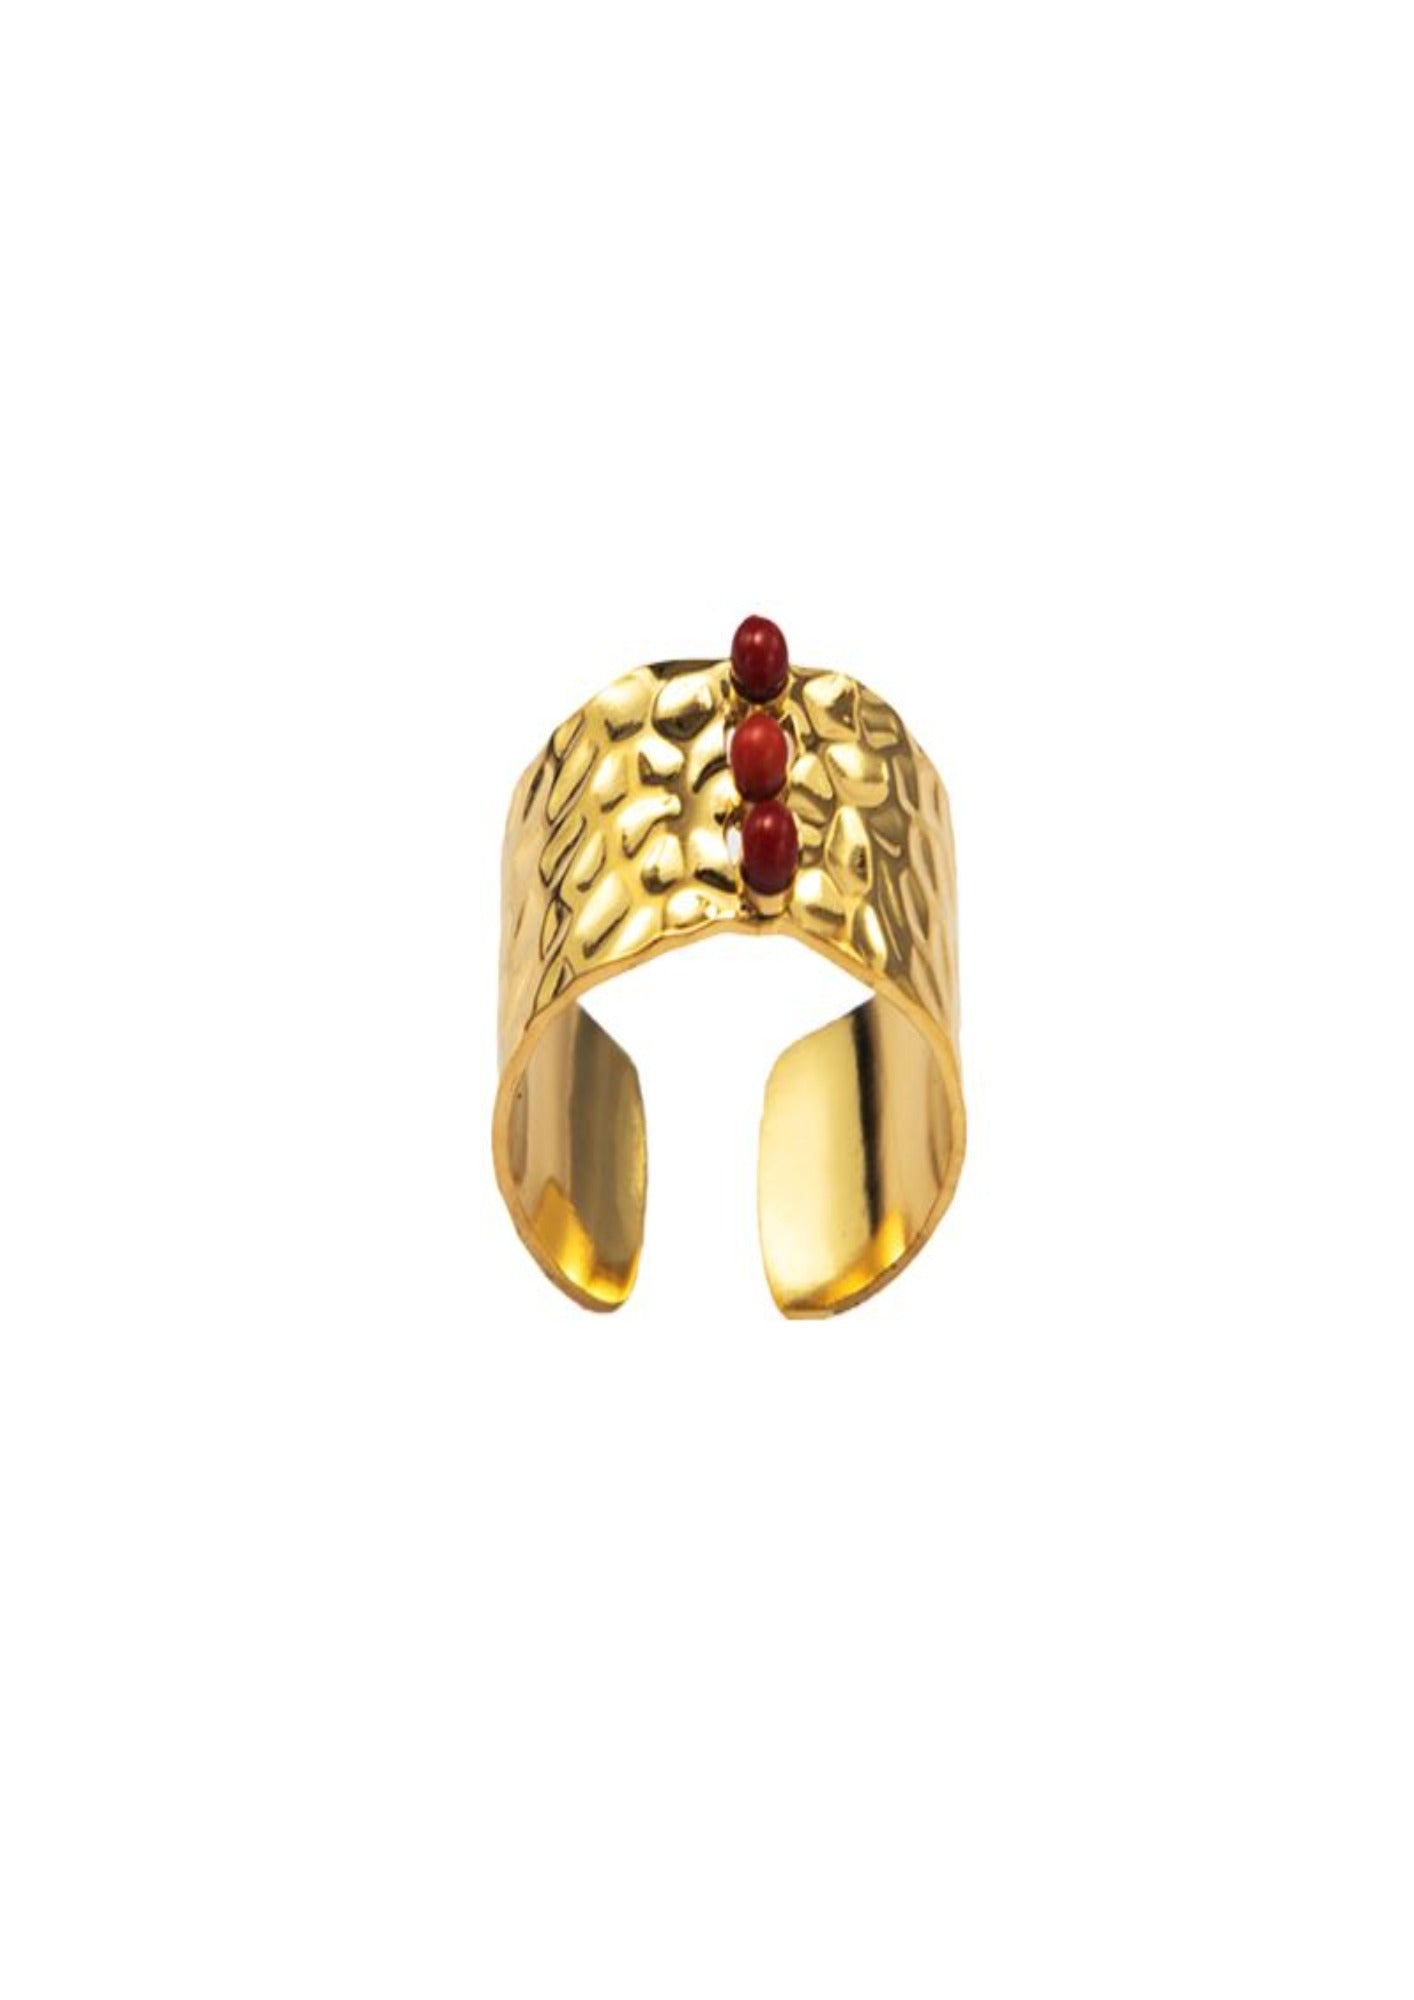 DAINTY RING earing Yubama Jewelry Online Store - The Elegant Designs of Gold and Silver ! Red 